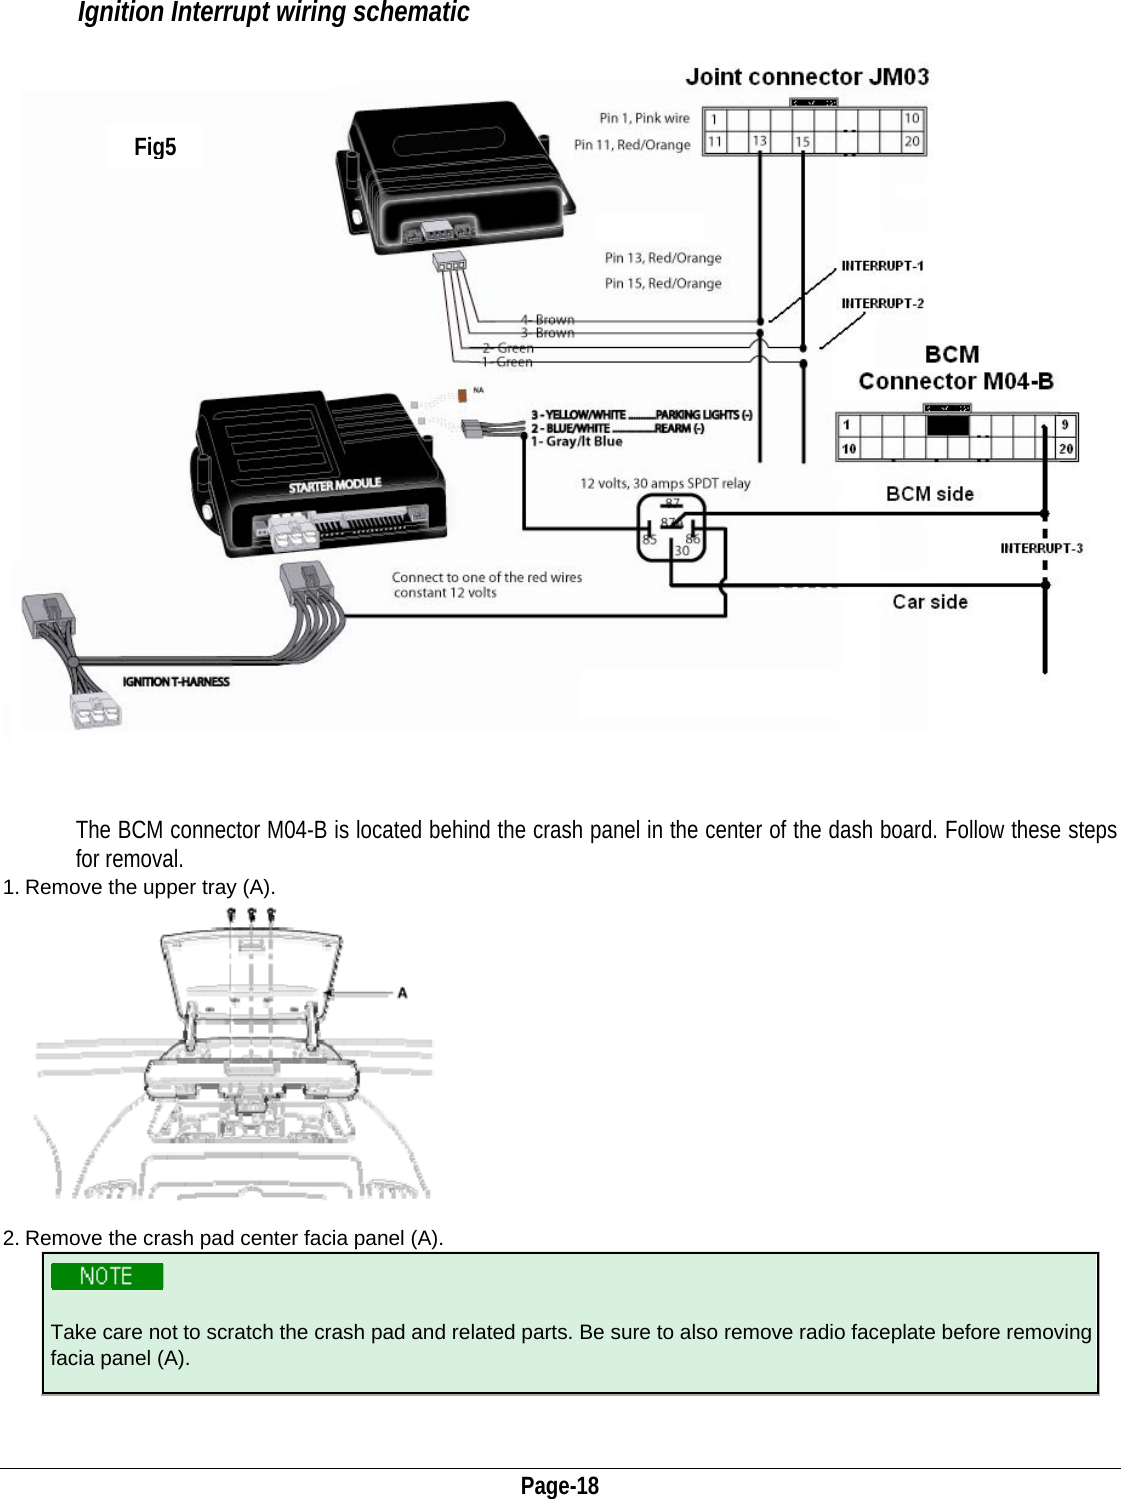  Page-18           Ignition Interrupt wiring schematic                                                                                                   The BCM connector M04-B is located behind the crash panel in the center of the dash board. Follow these steps  for removal. 1. Remove the upper tray (A). 2. Remove the crash pad center facia panel (A).  Take care not to scratch the crash pad and related parts. Be sure to also remove radio faceplate before removing facia panel (A).   Fig5 